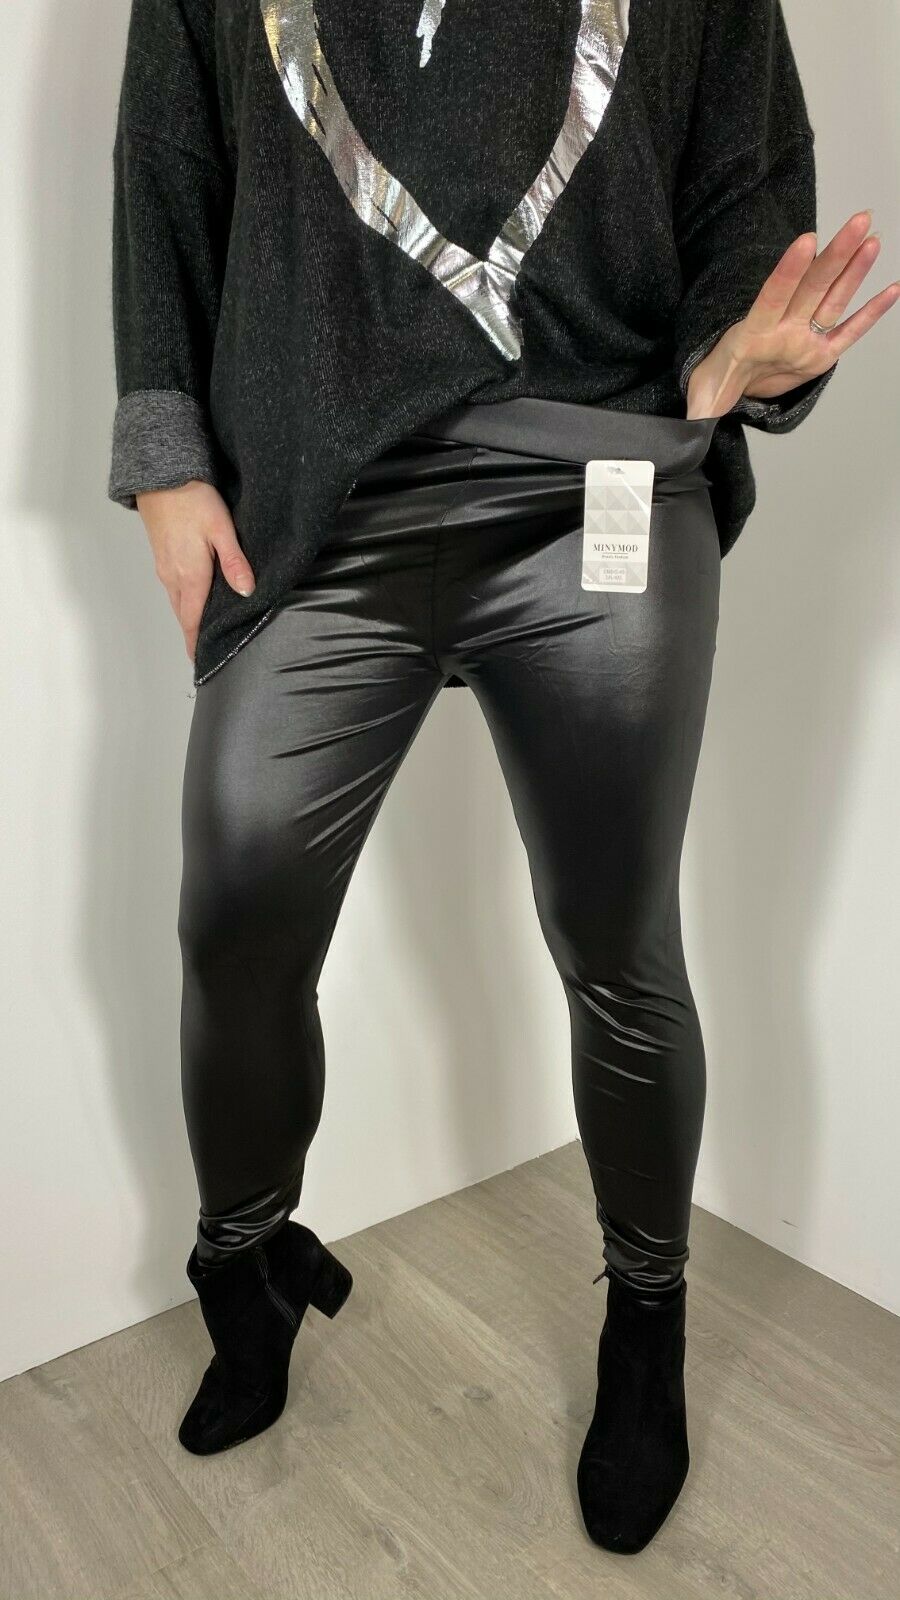 Leather Look Leggings Black - (Curvy) – Queen Of Fashion